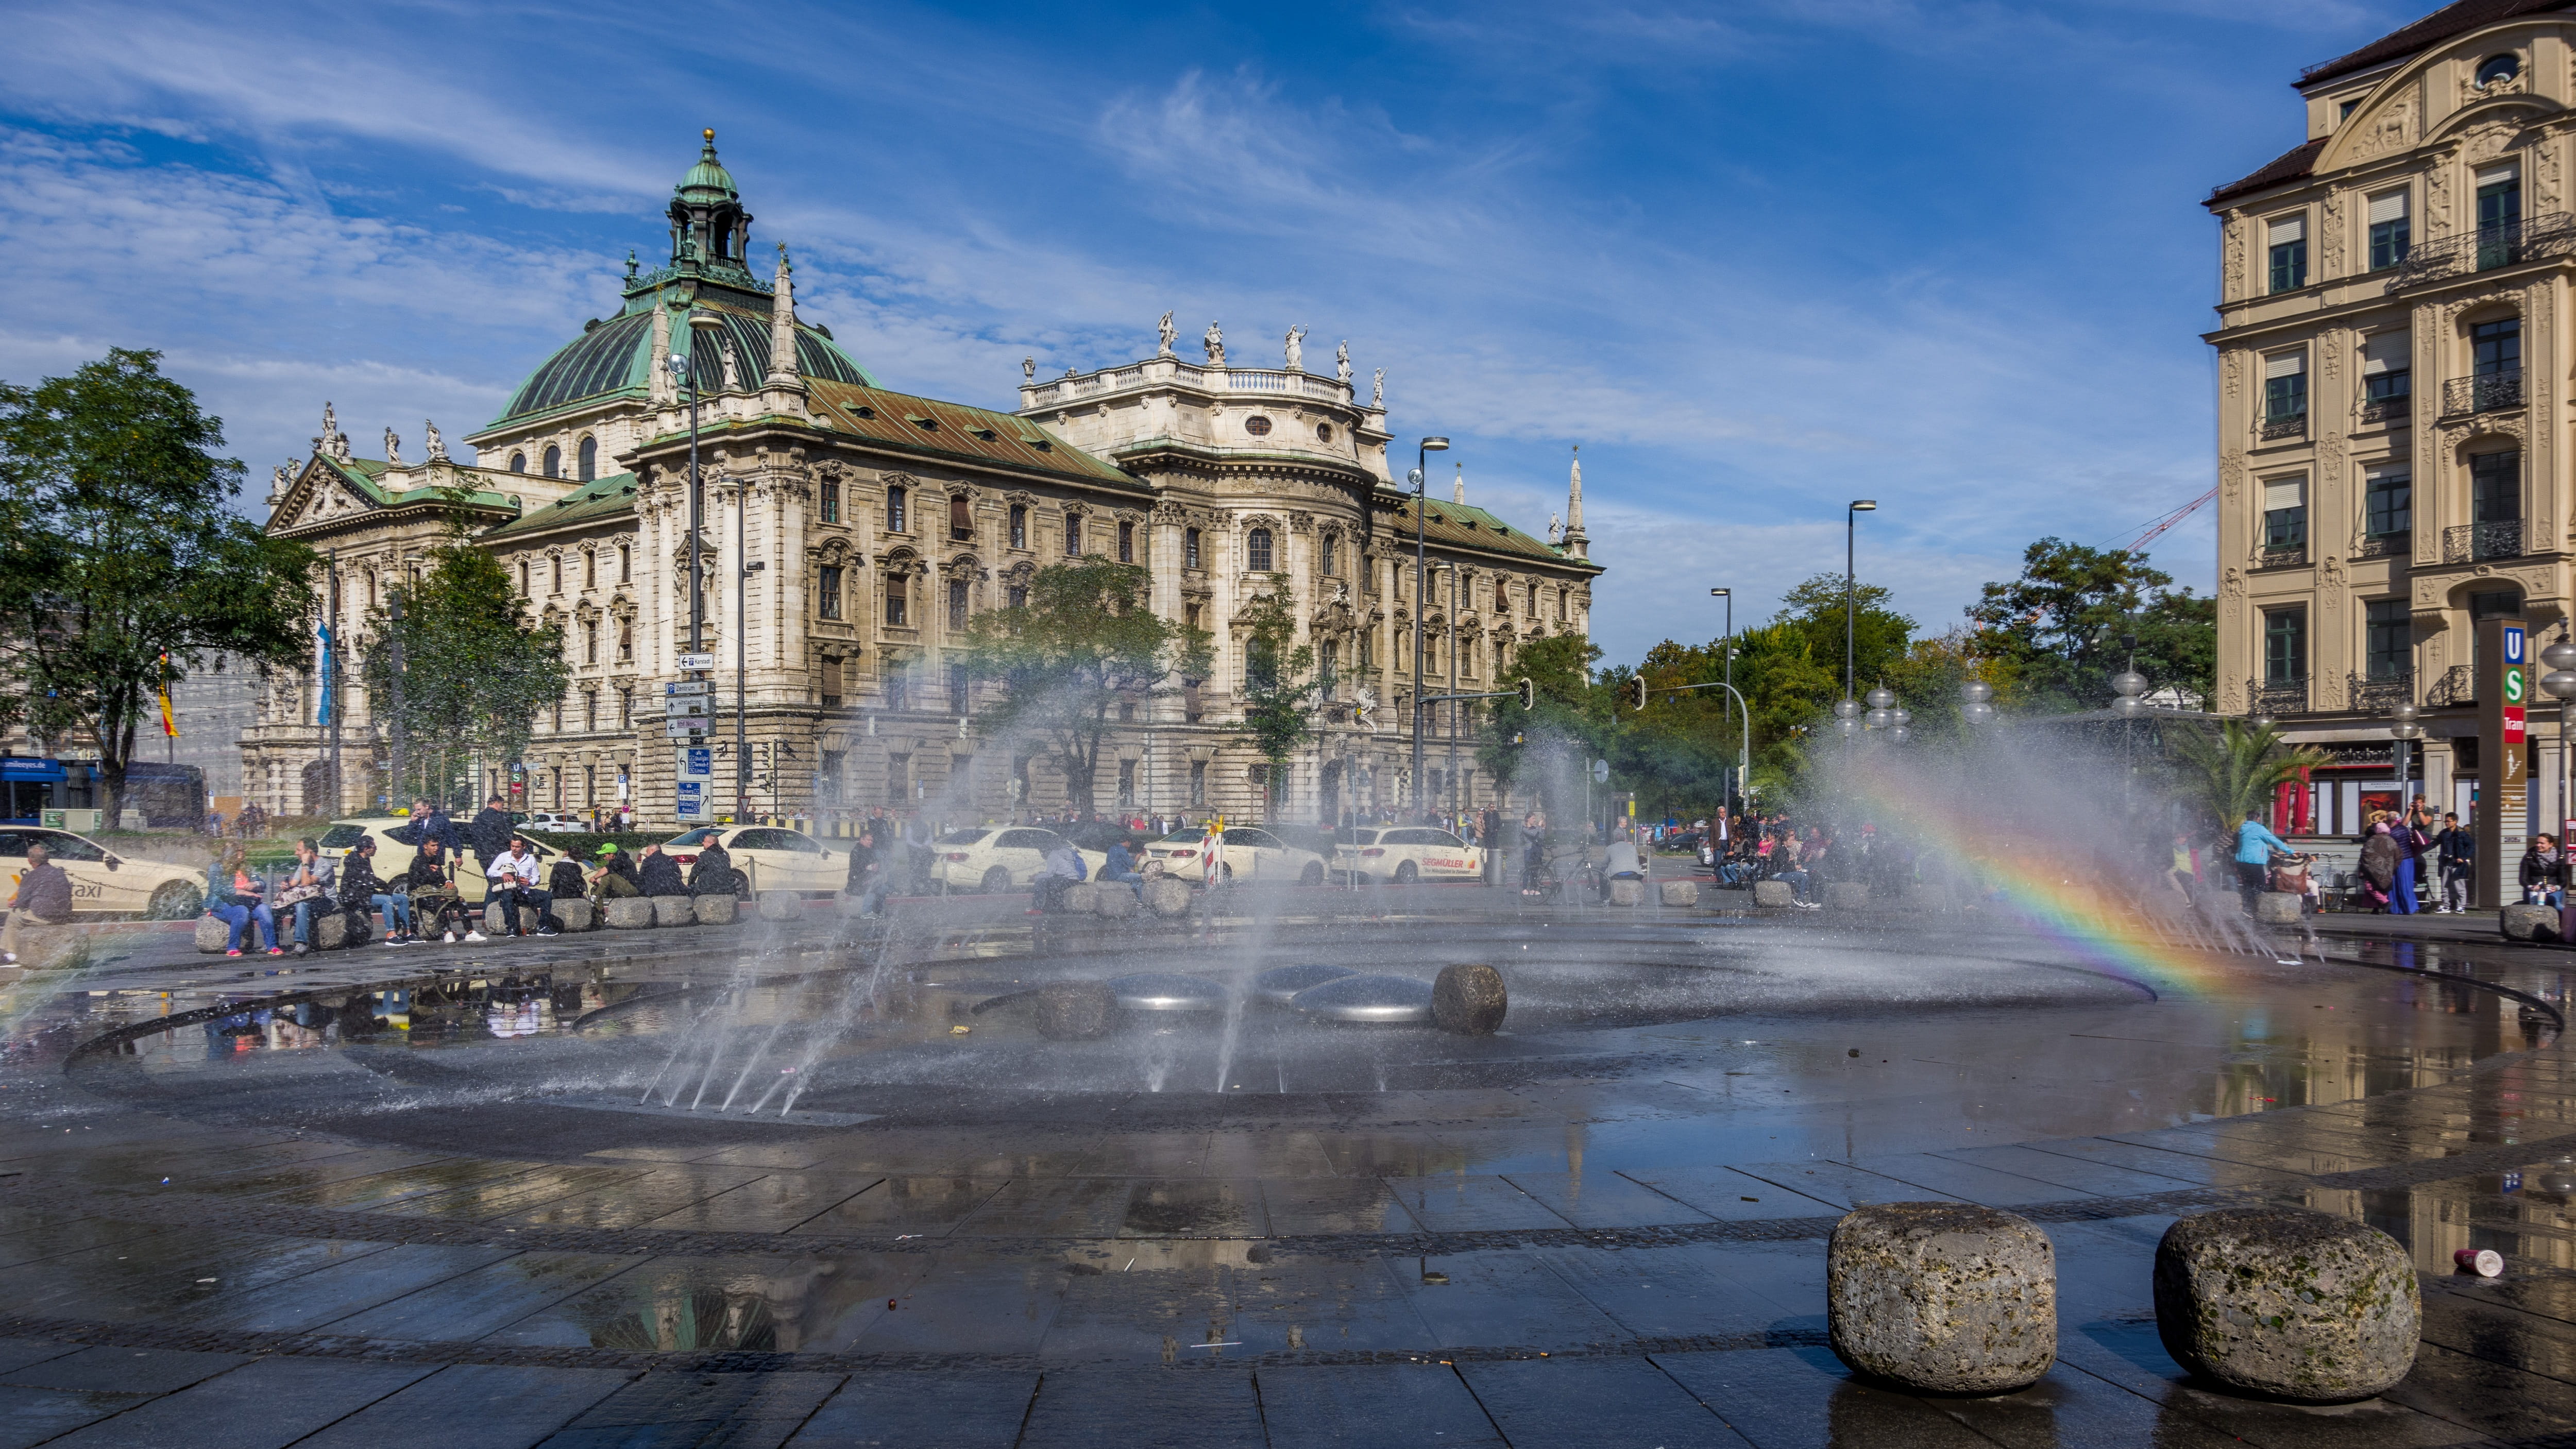 fountain, waters, architecture, city, travel, building, munich